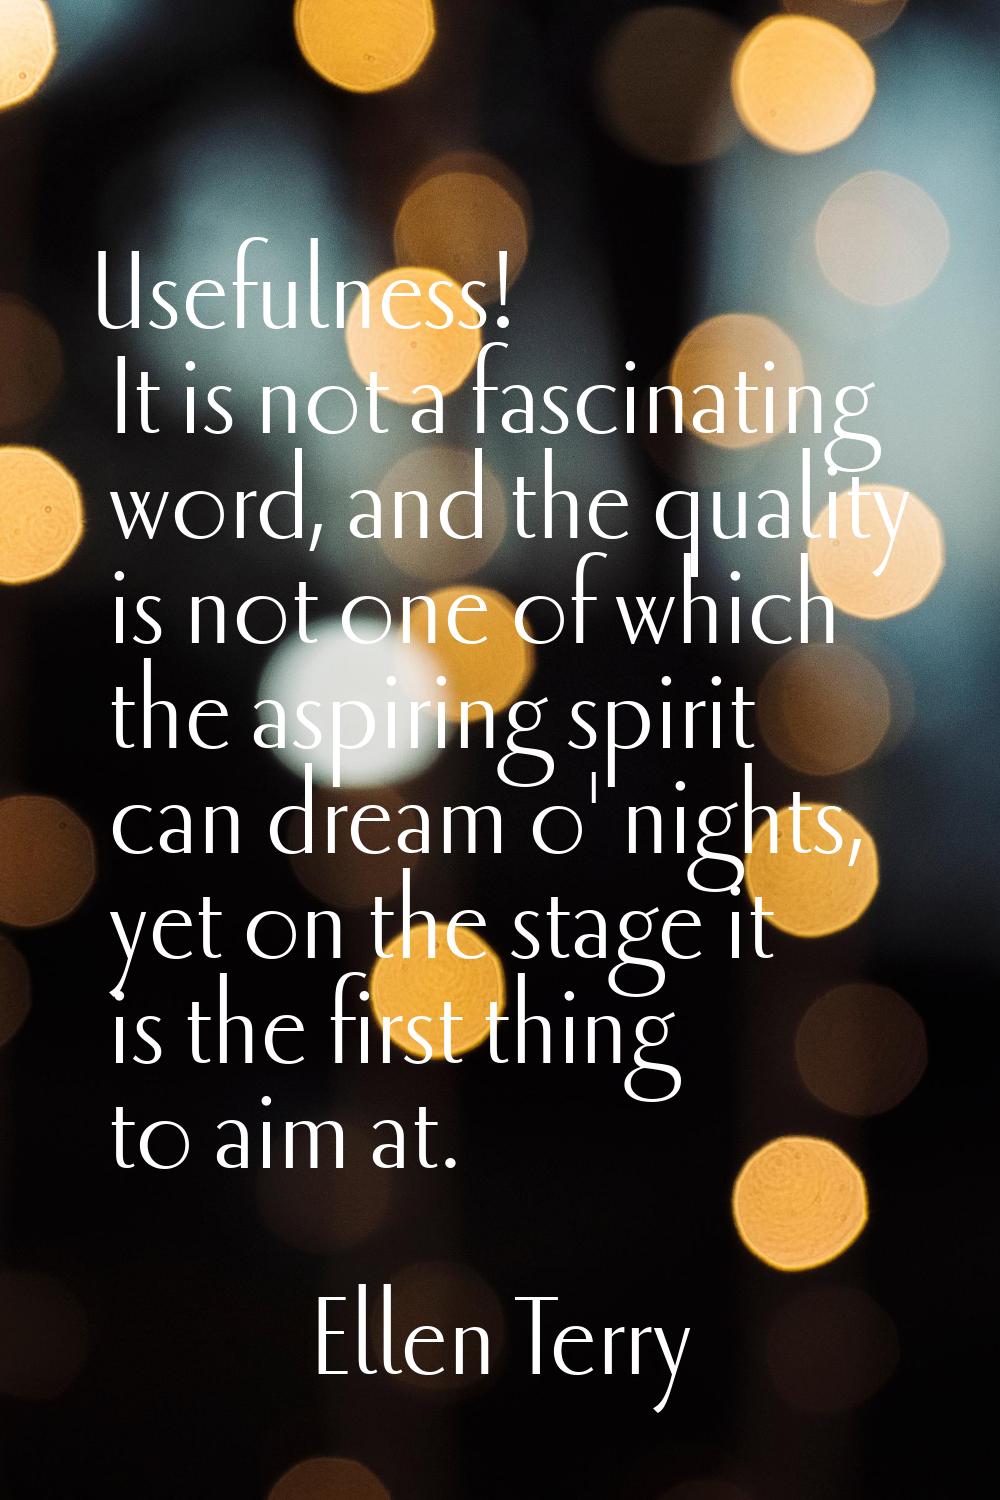 Usefulness! It is not a fascinating word, and the quality is not one of which the aspiring spirit c